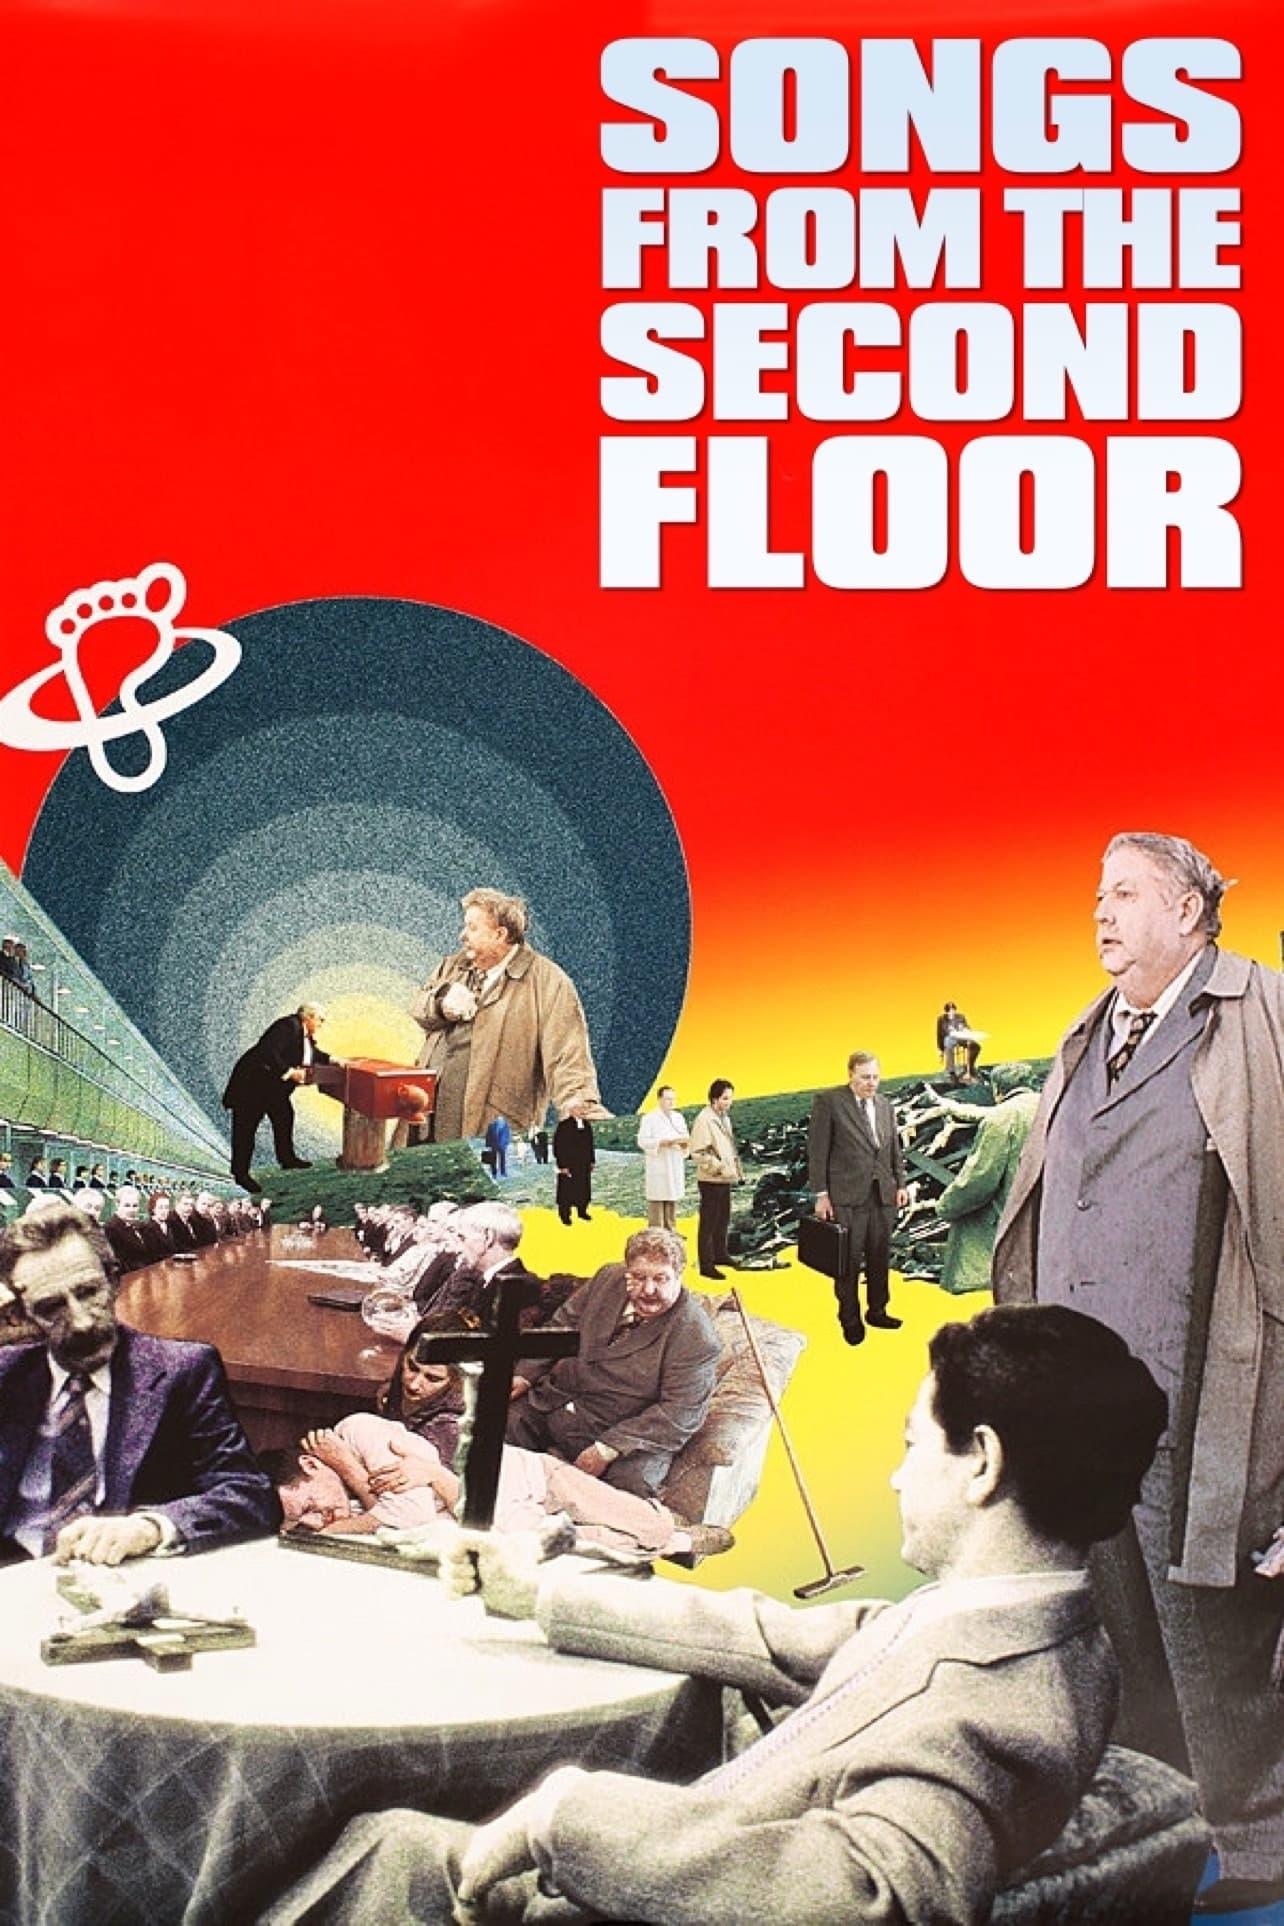 Songs from the Second Floor poster